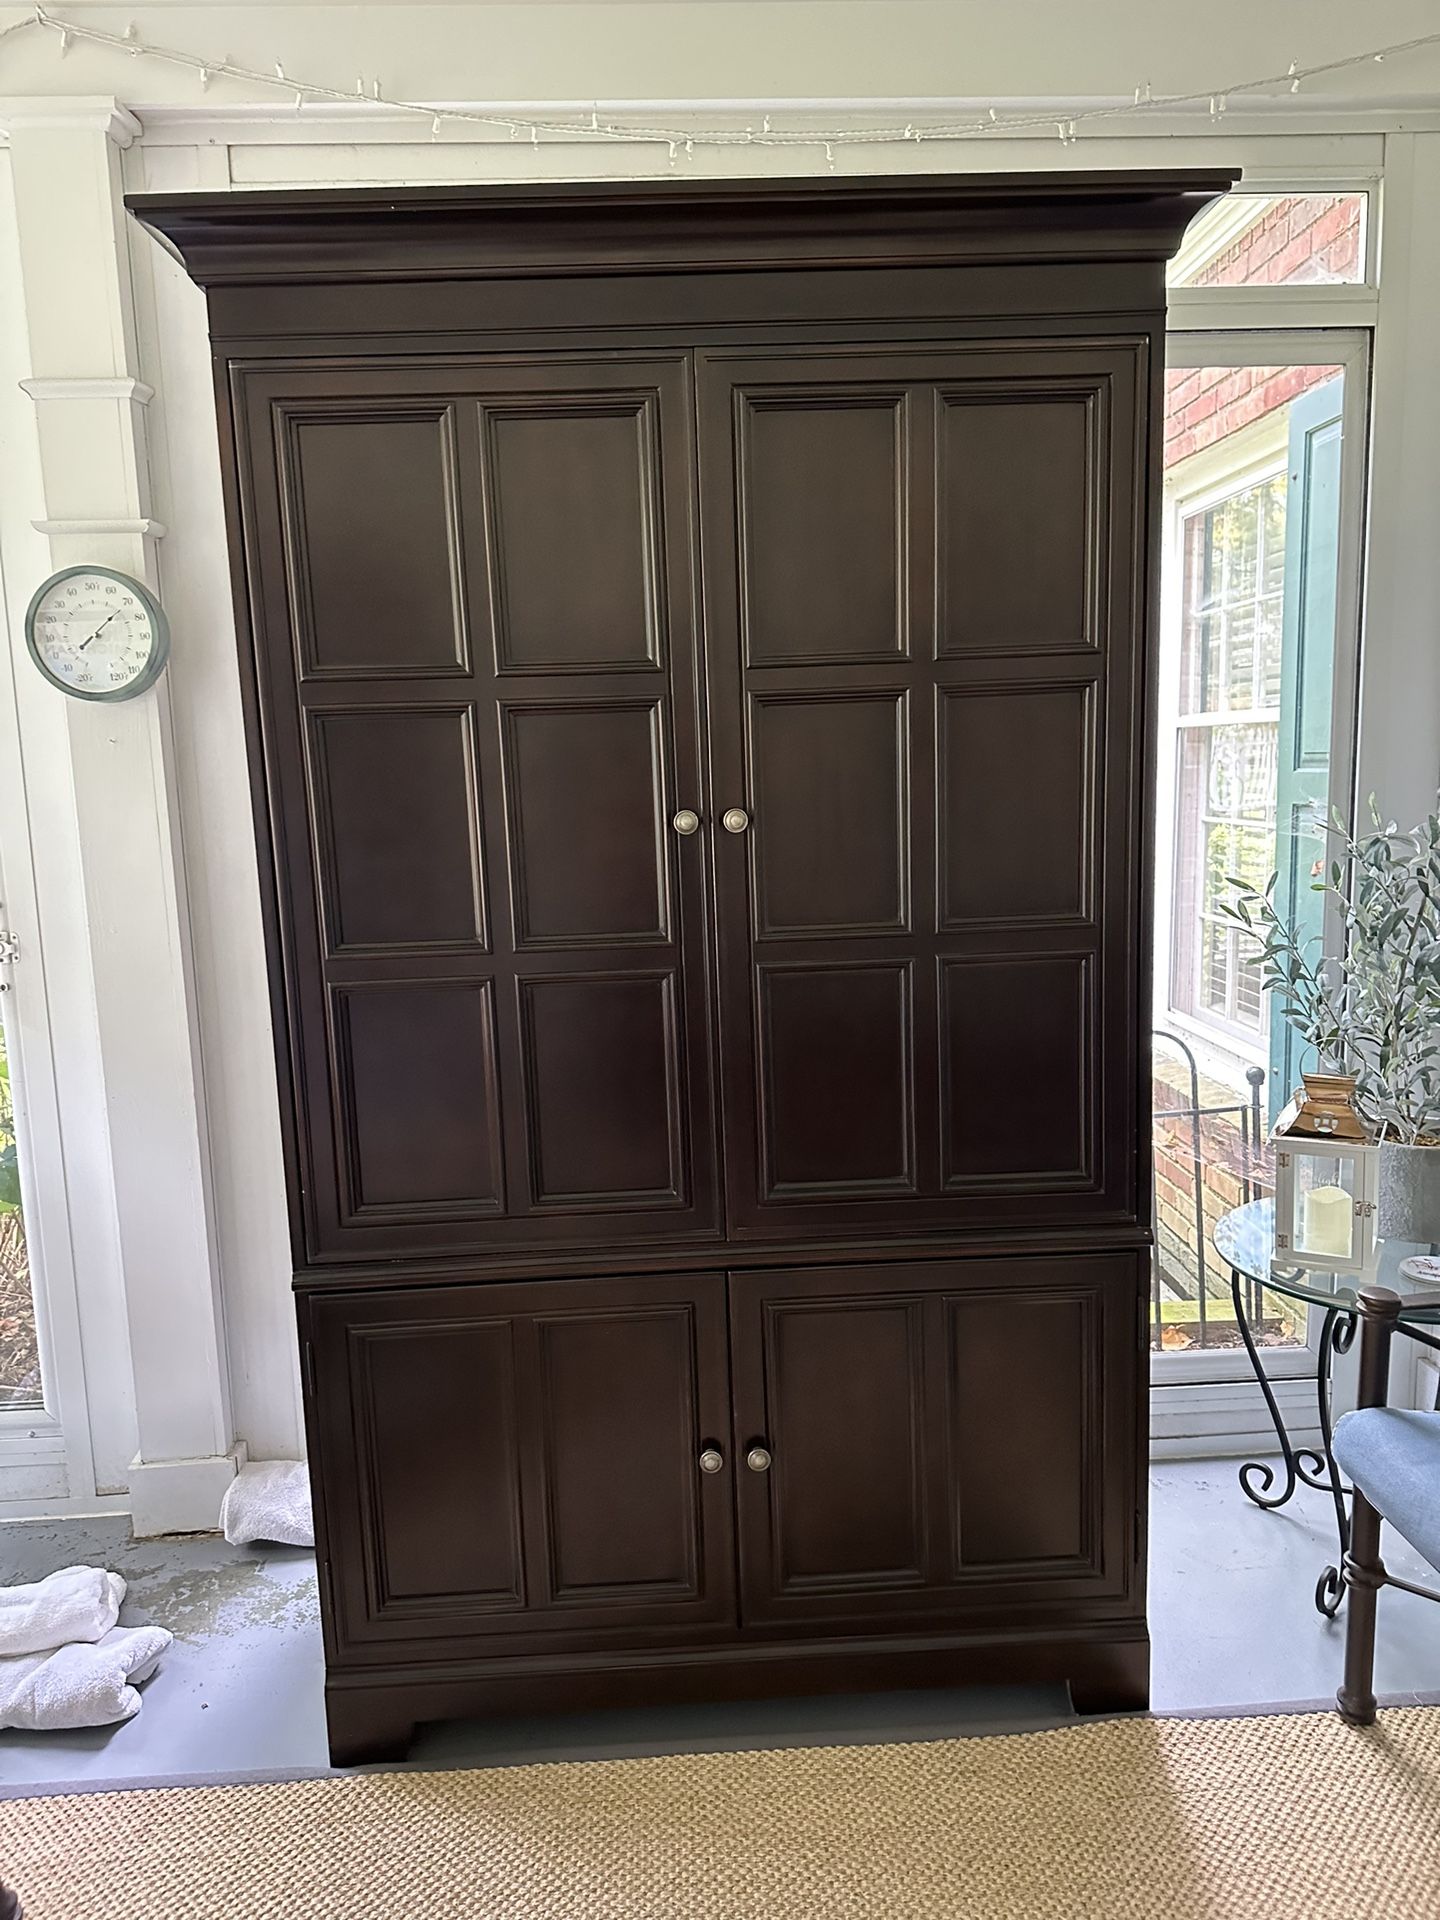 Armoire for TV/ Entertainment System